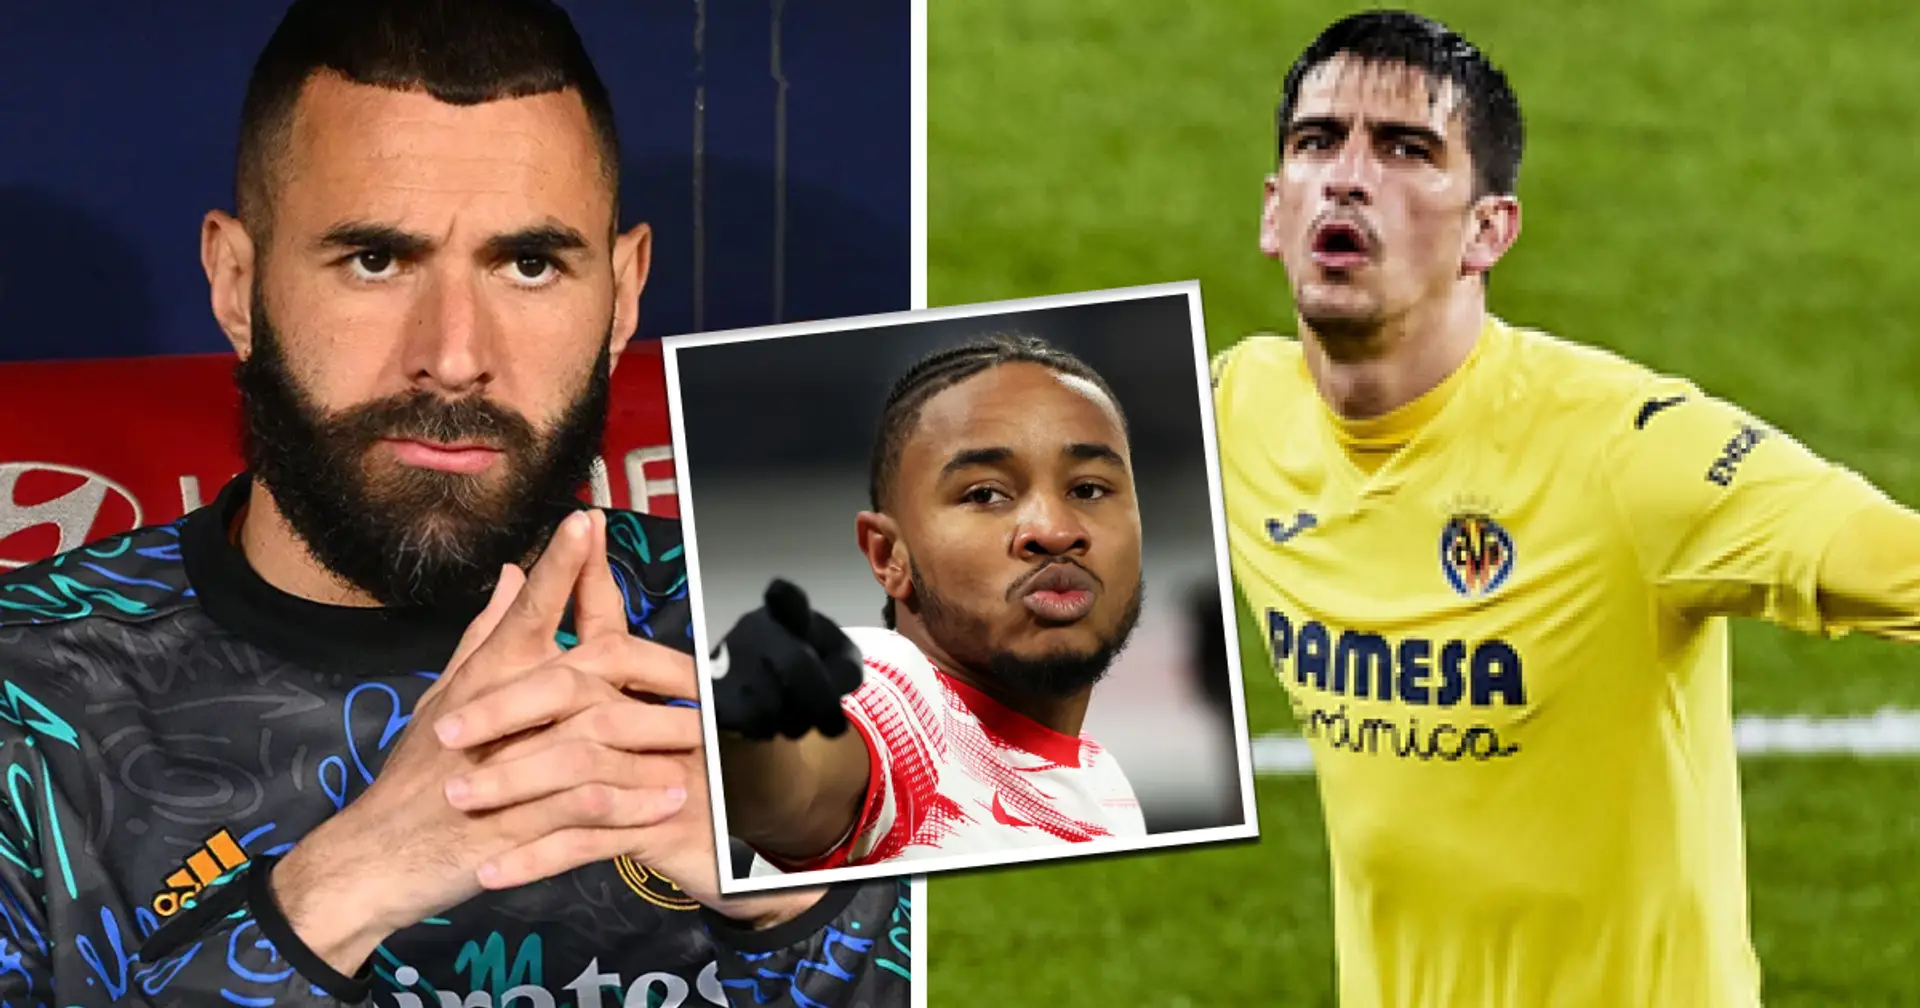 5 best backups for Benzema based on playing style and stats